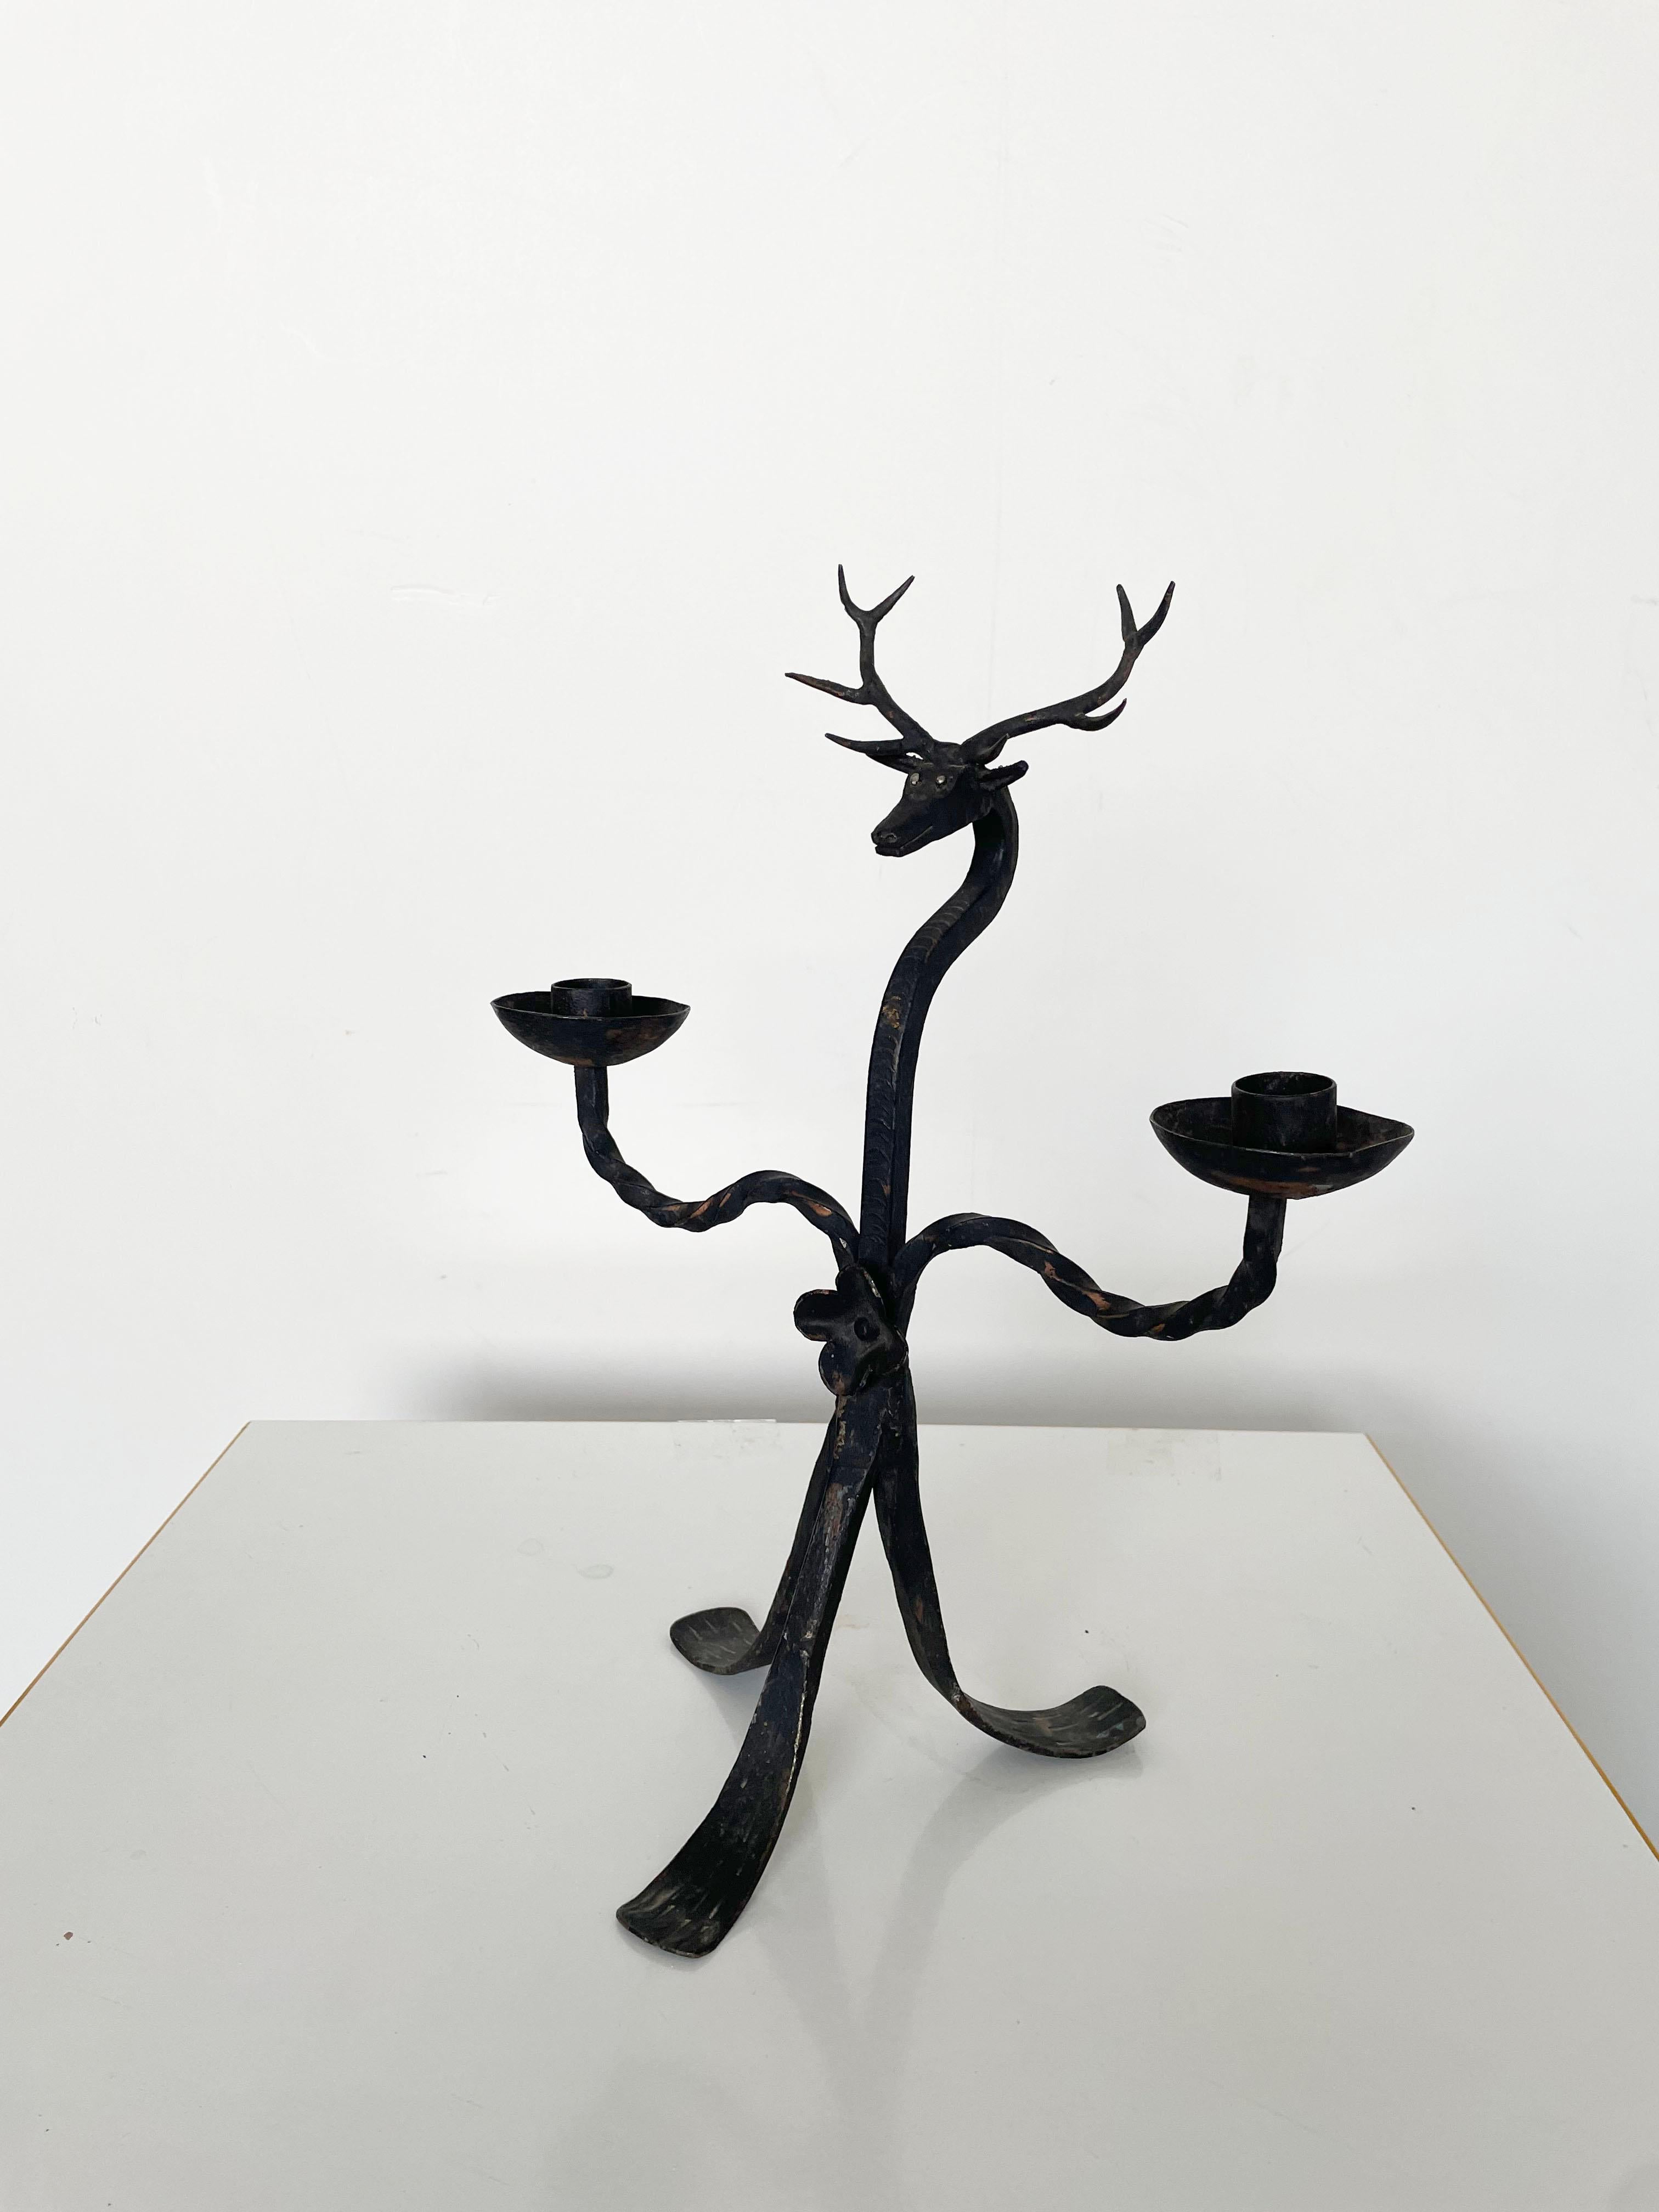 Brutalist Style Wrought Iron Deer Shaped Candlestick Candelabra, 1940s / 1950s For Sale 1